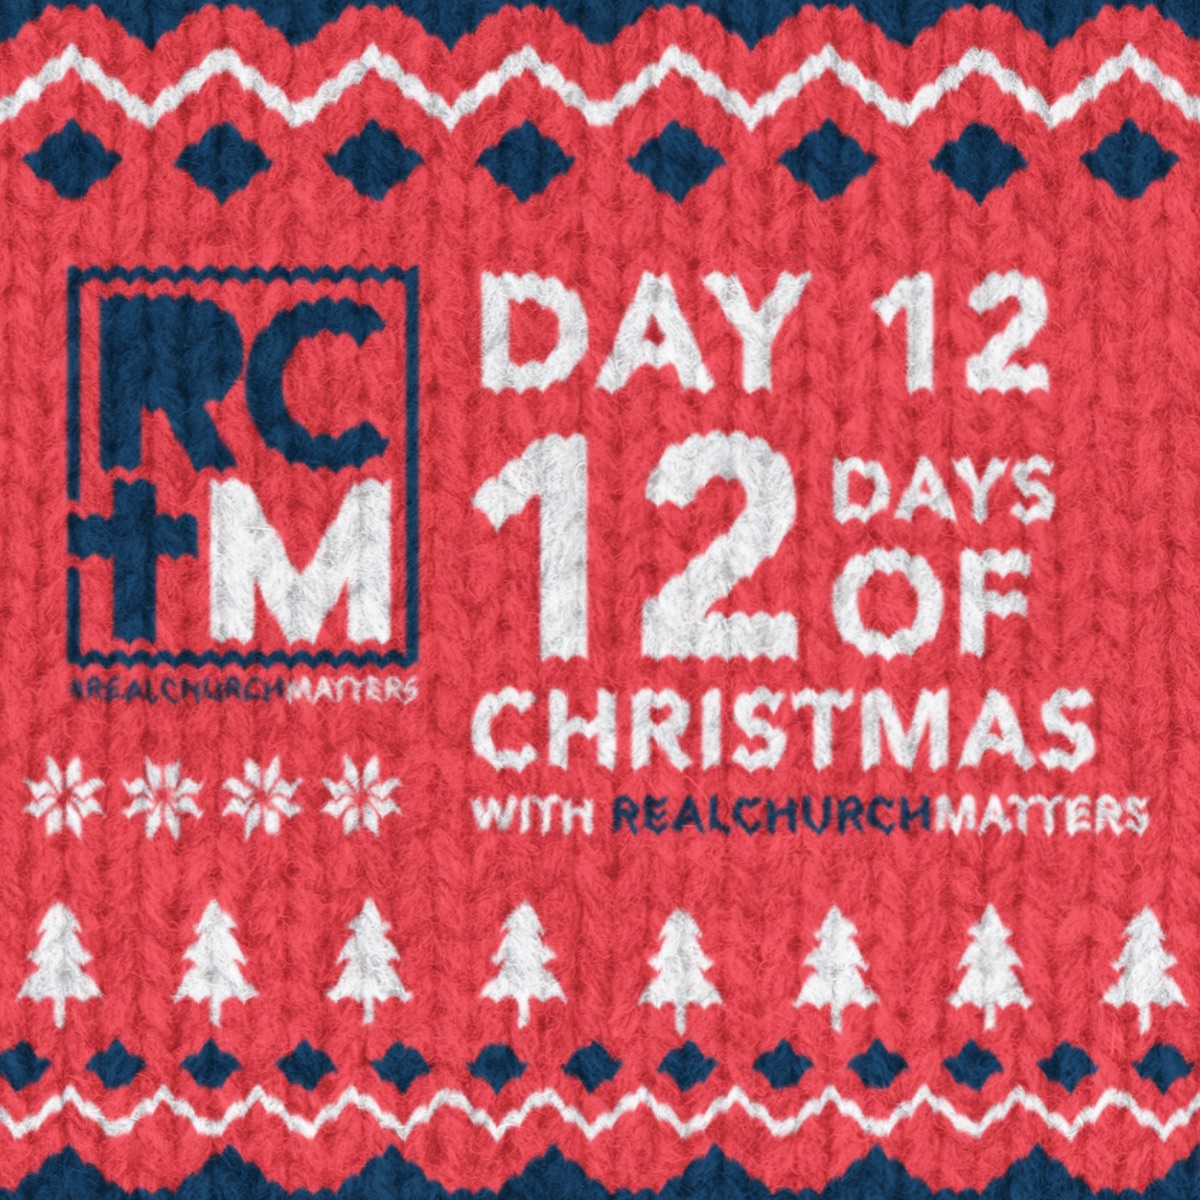 Day 12 - 12 Days of Christmas with Real Church Matters